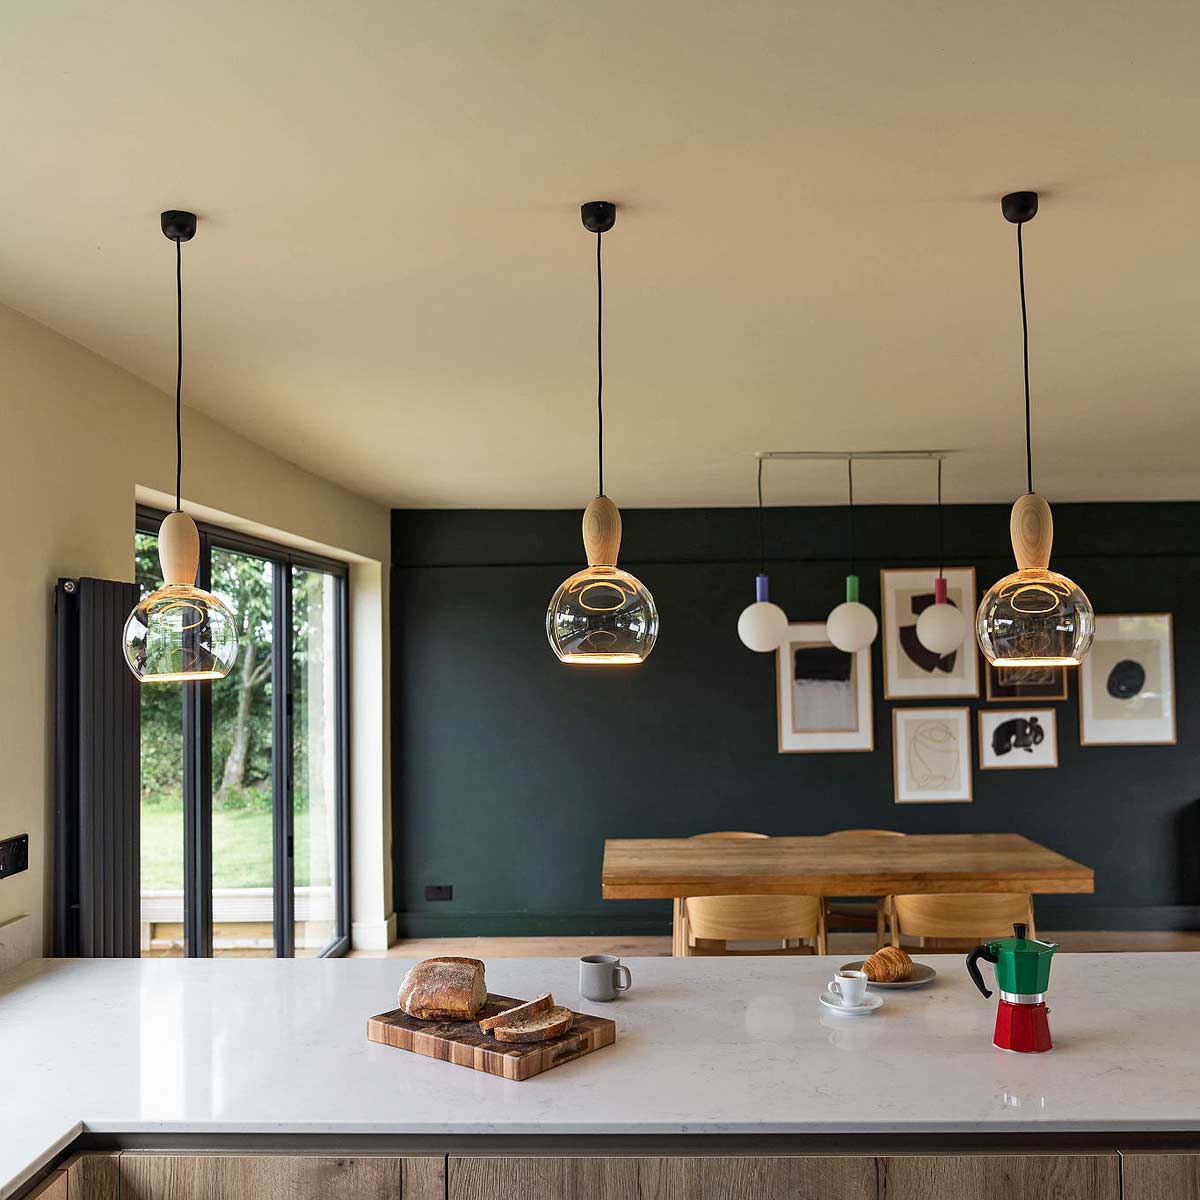 The Woody wood pendant light is supplied by South Charlotte Fine Lighting and can be used to light a breakfast bar